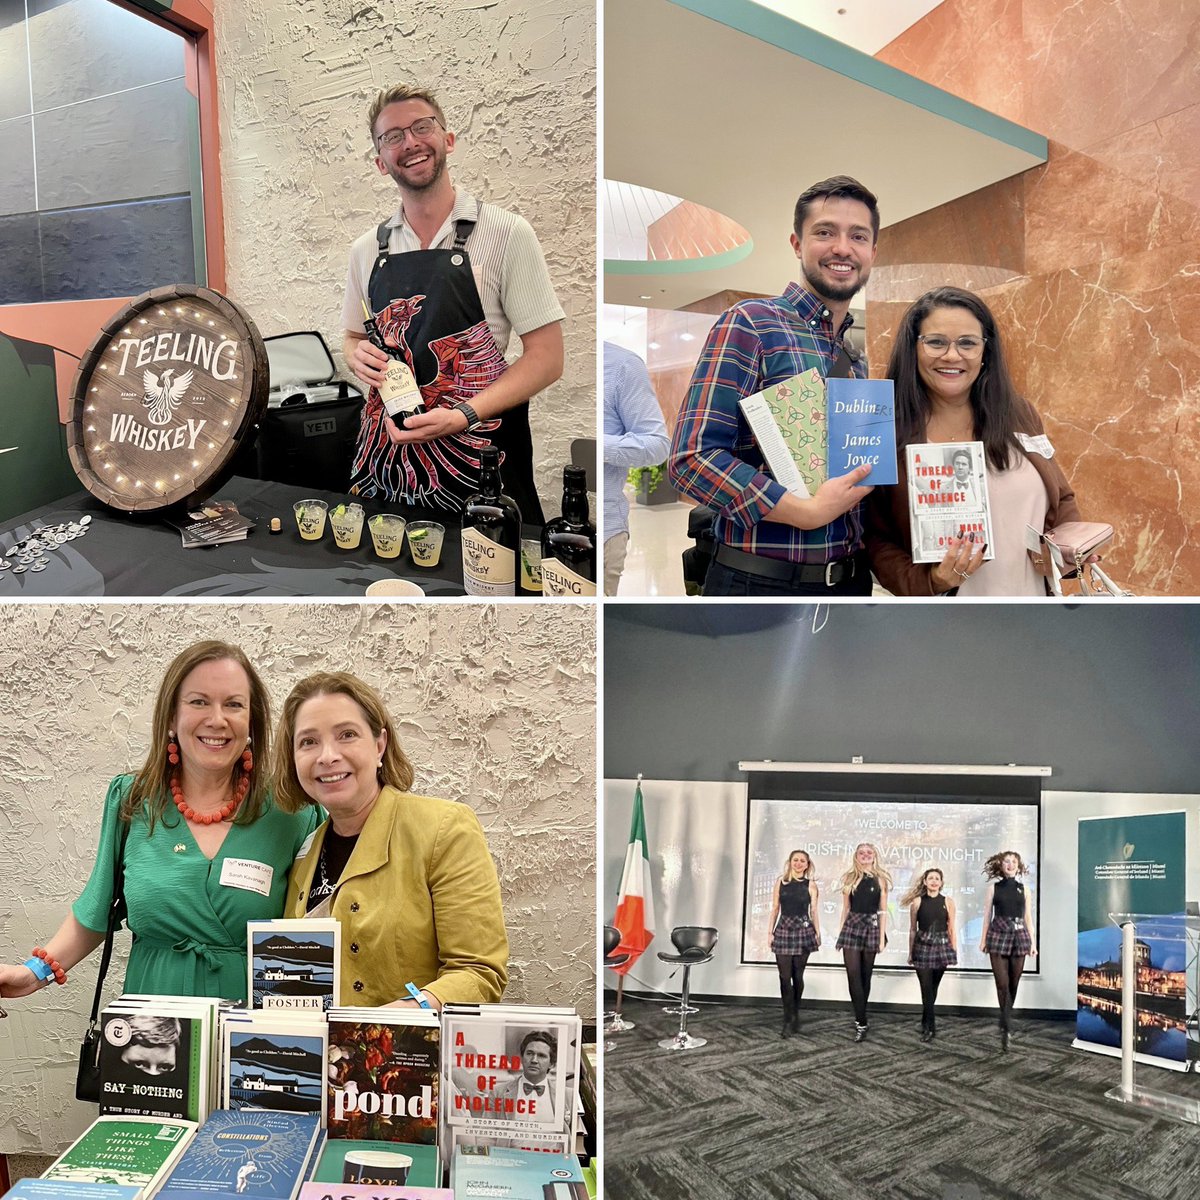 Massive thanks to everyone who participated in & attended the Irish Innovation Night at @VentureCafeMIA. As well as a great discussion on Irish culture & society, followed by a panel on tech, we loved showcasing Irish sport, food & drink, dance, literature & tourism highlights.💚